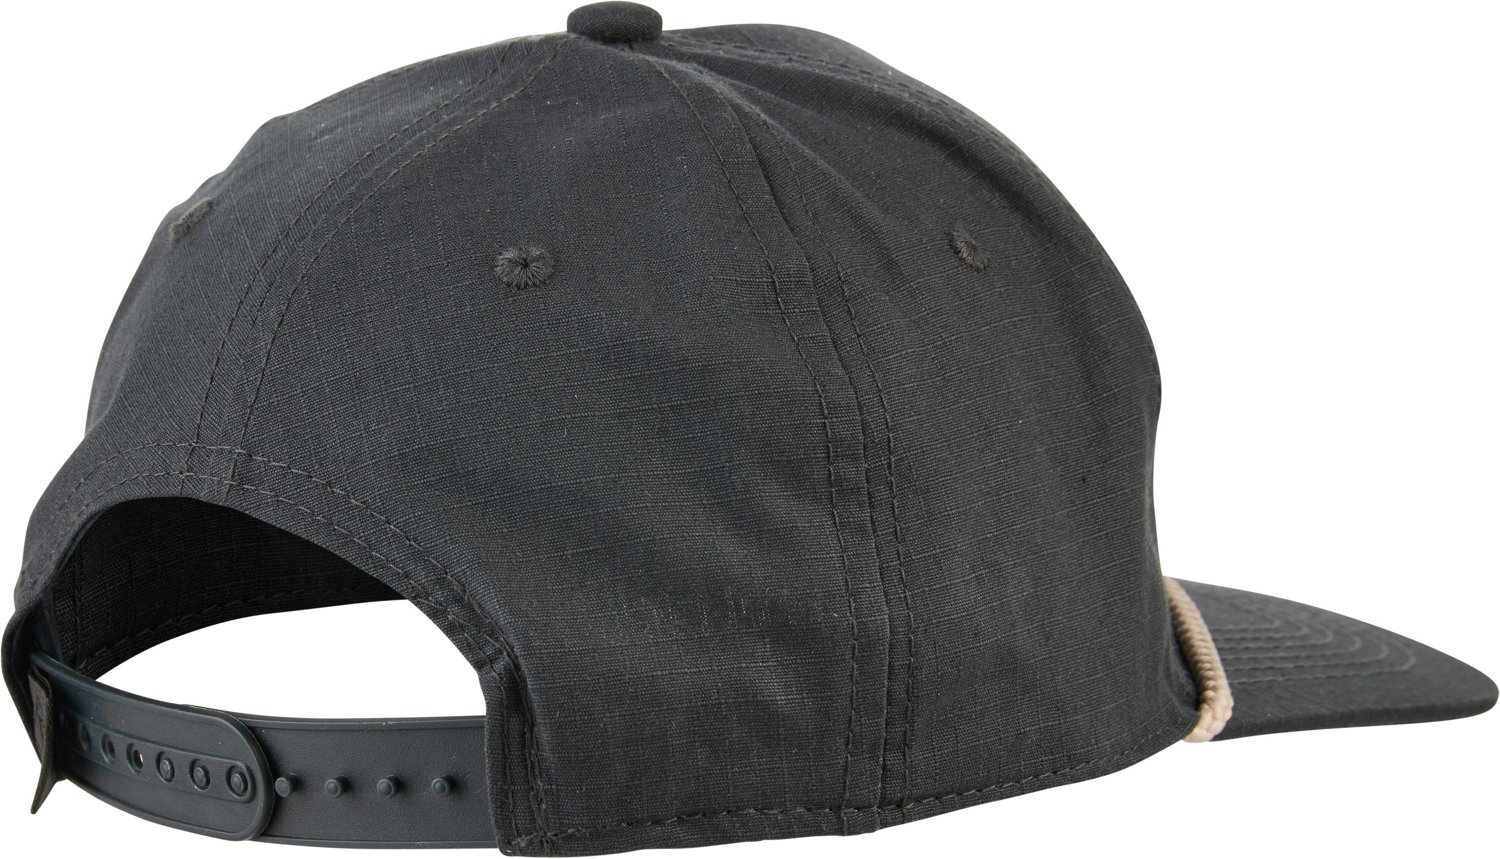 BURLEBO Men's Diving Duck Cap | Free Shipping at Academy